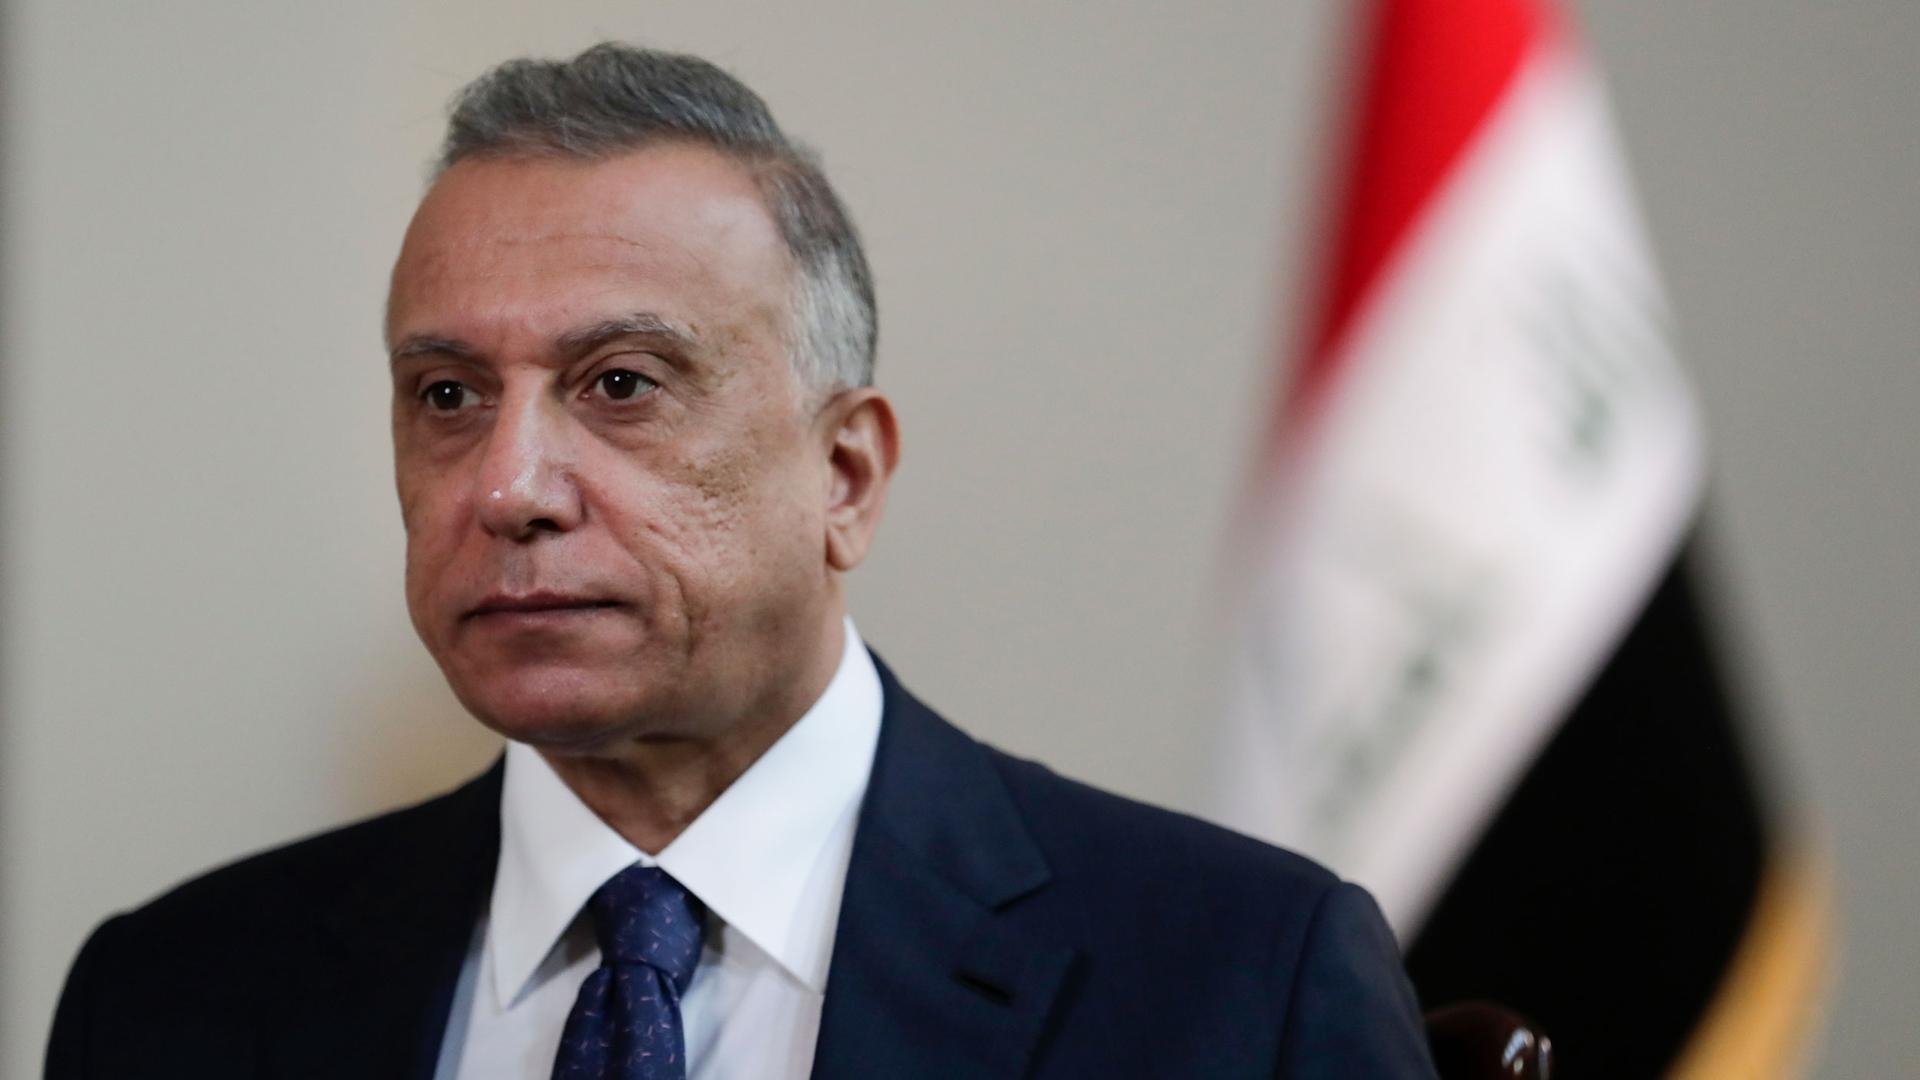 Iraqi Prime Minister Mustafa al-Kadhimi is shown wearing a dark suit and tie with the Iraqi national flag in soft focus in the background.